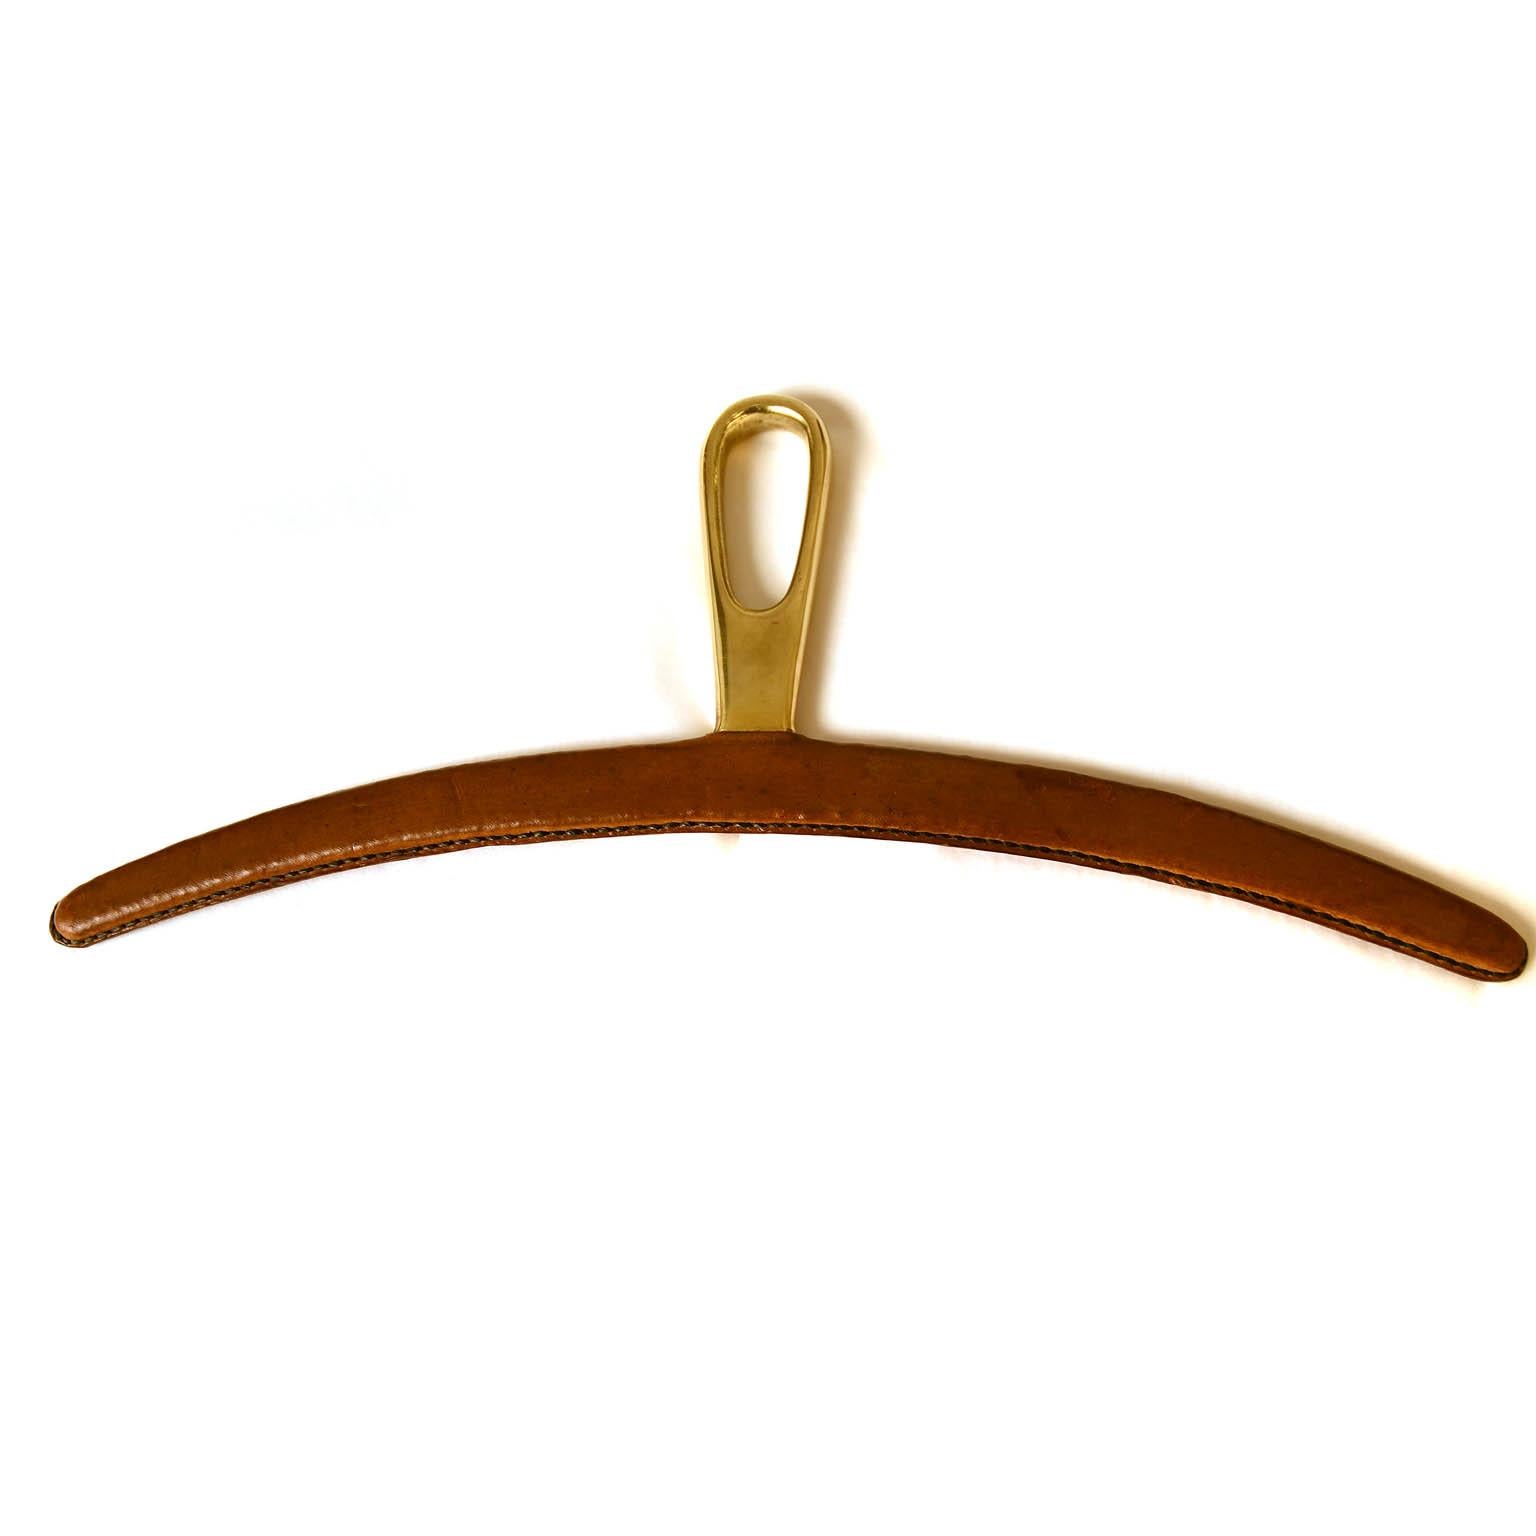 Handstitched leather covers heavy brass hanger, designed by Carl Auböck in 1950s. Rarely seen piece. But not signed with a stamp.
Model number: 3664, very good vintage condition.
Literature: Die Kataloge der Werkstätter Carl Auböck 1925 - 1975,